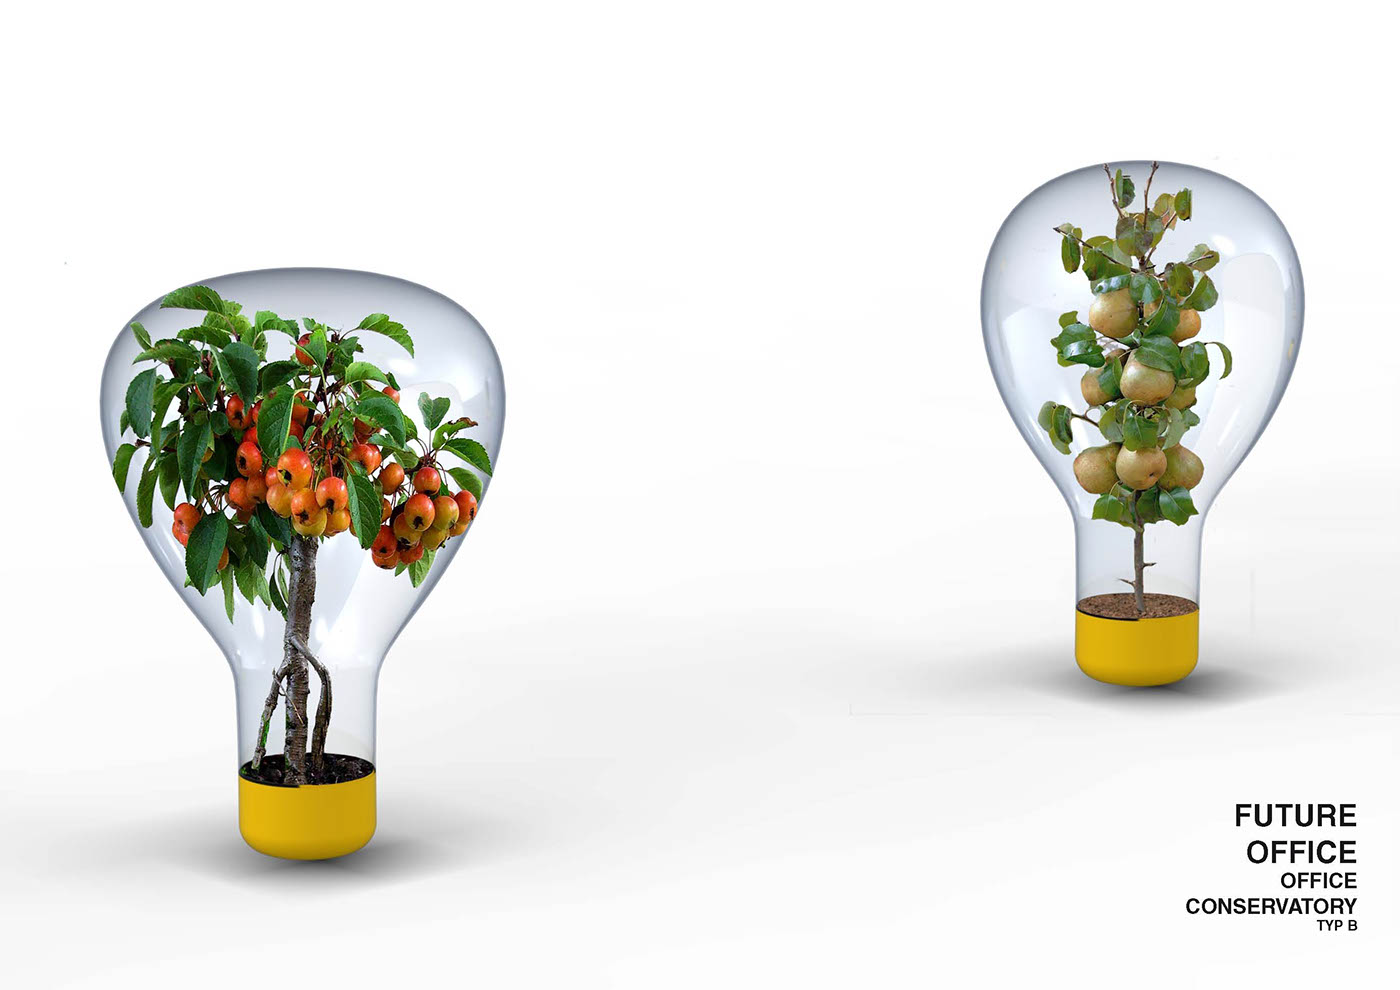 productdesign future Office fast growing plants